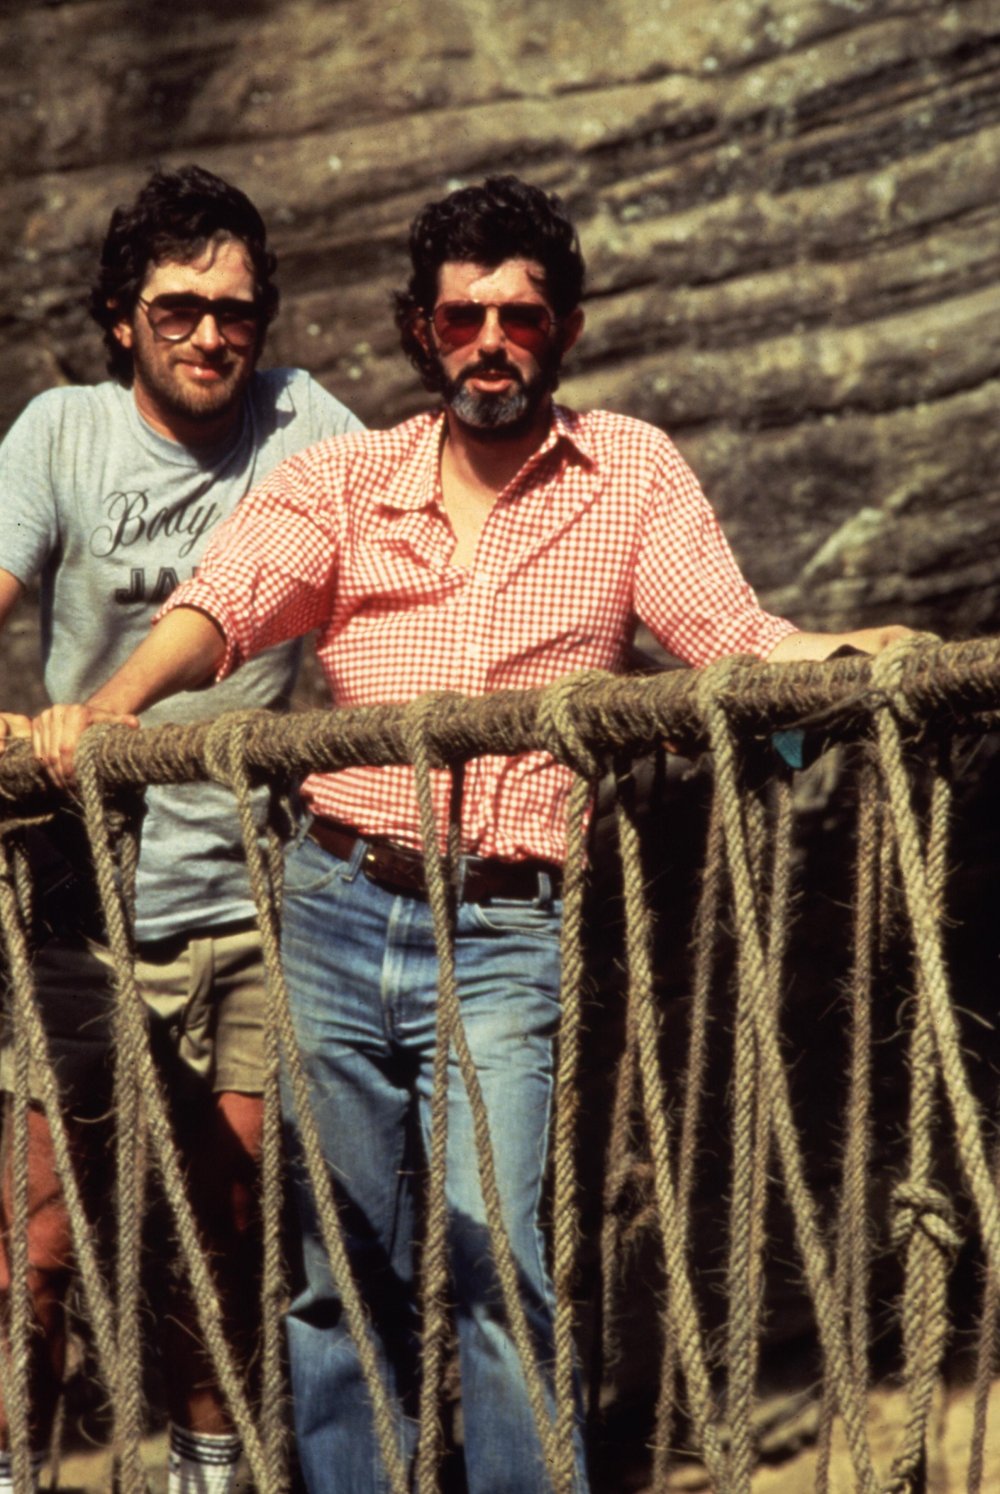 Spielberg and writer-producer George Lucas tread the treacherous rope bridge used in the finale of Indiana Jones and the Temple. The rope bridge set was constructed at Elstree Studios in Hertfordshire